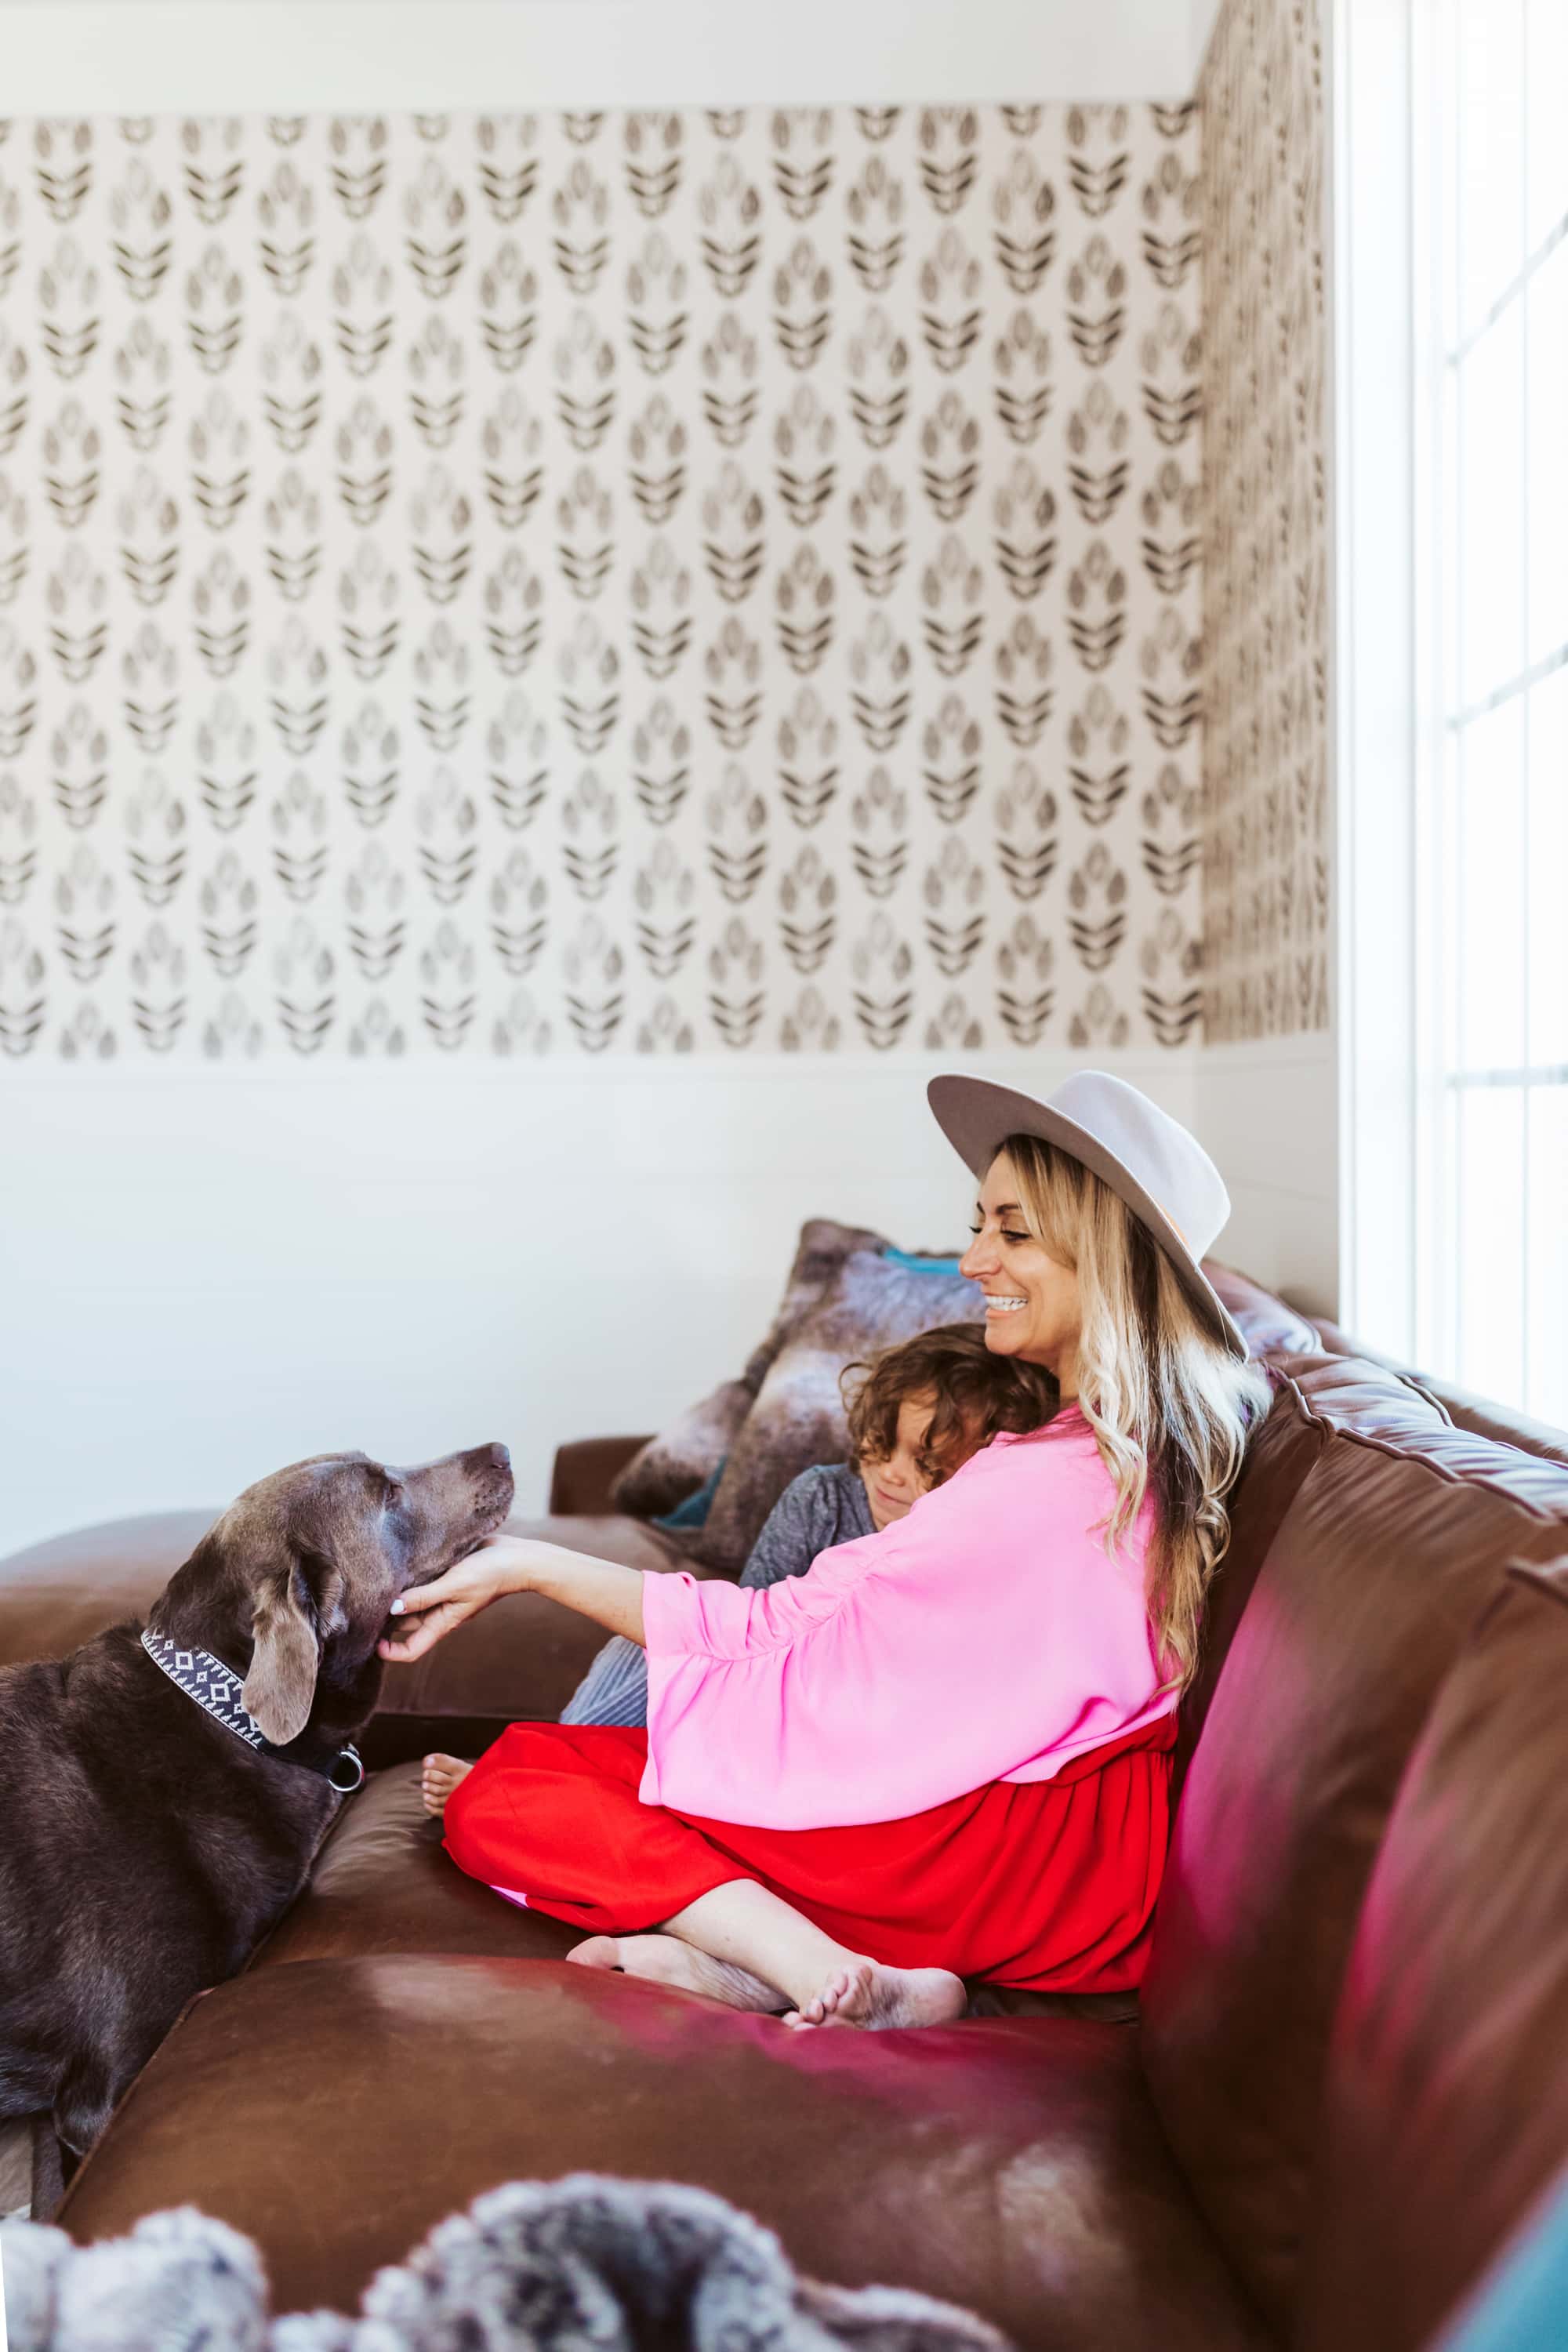 Stylish decor and pets can coexist in your home. Here's how.